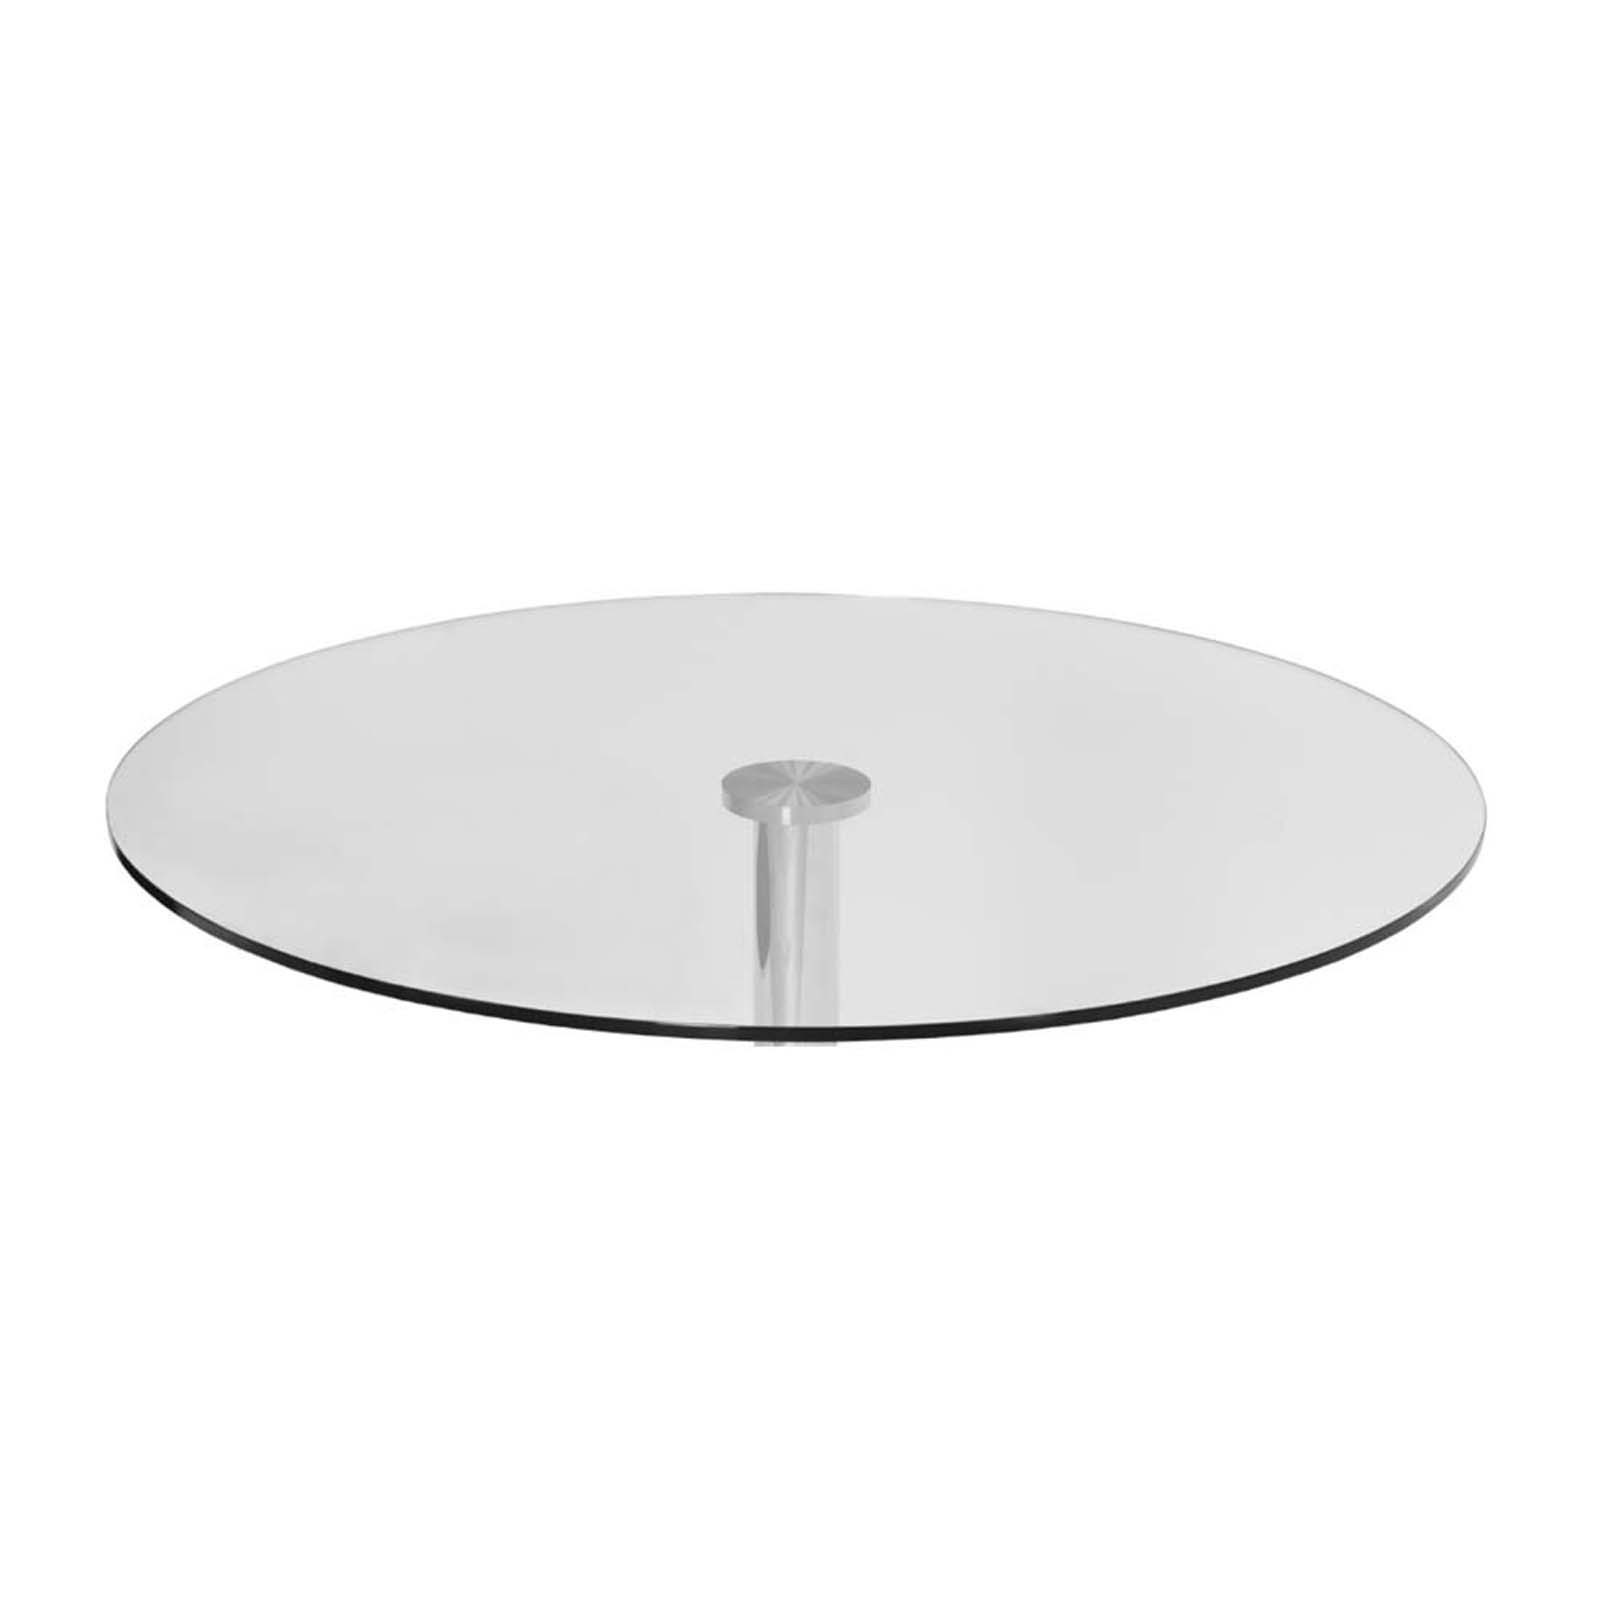 32" Clear Glass Round Table Top